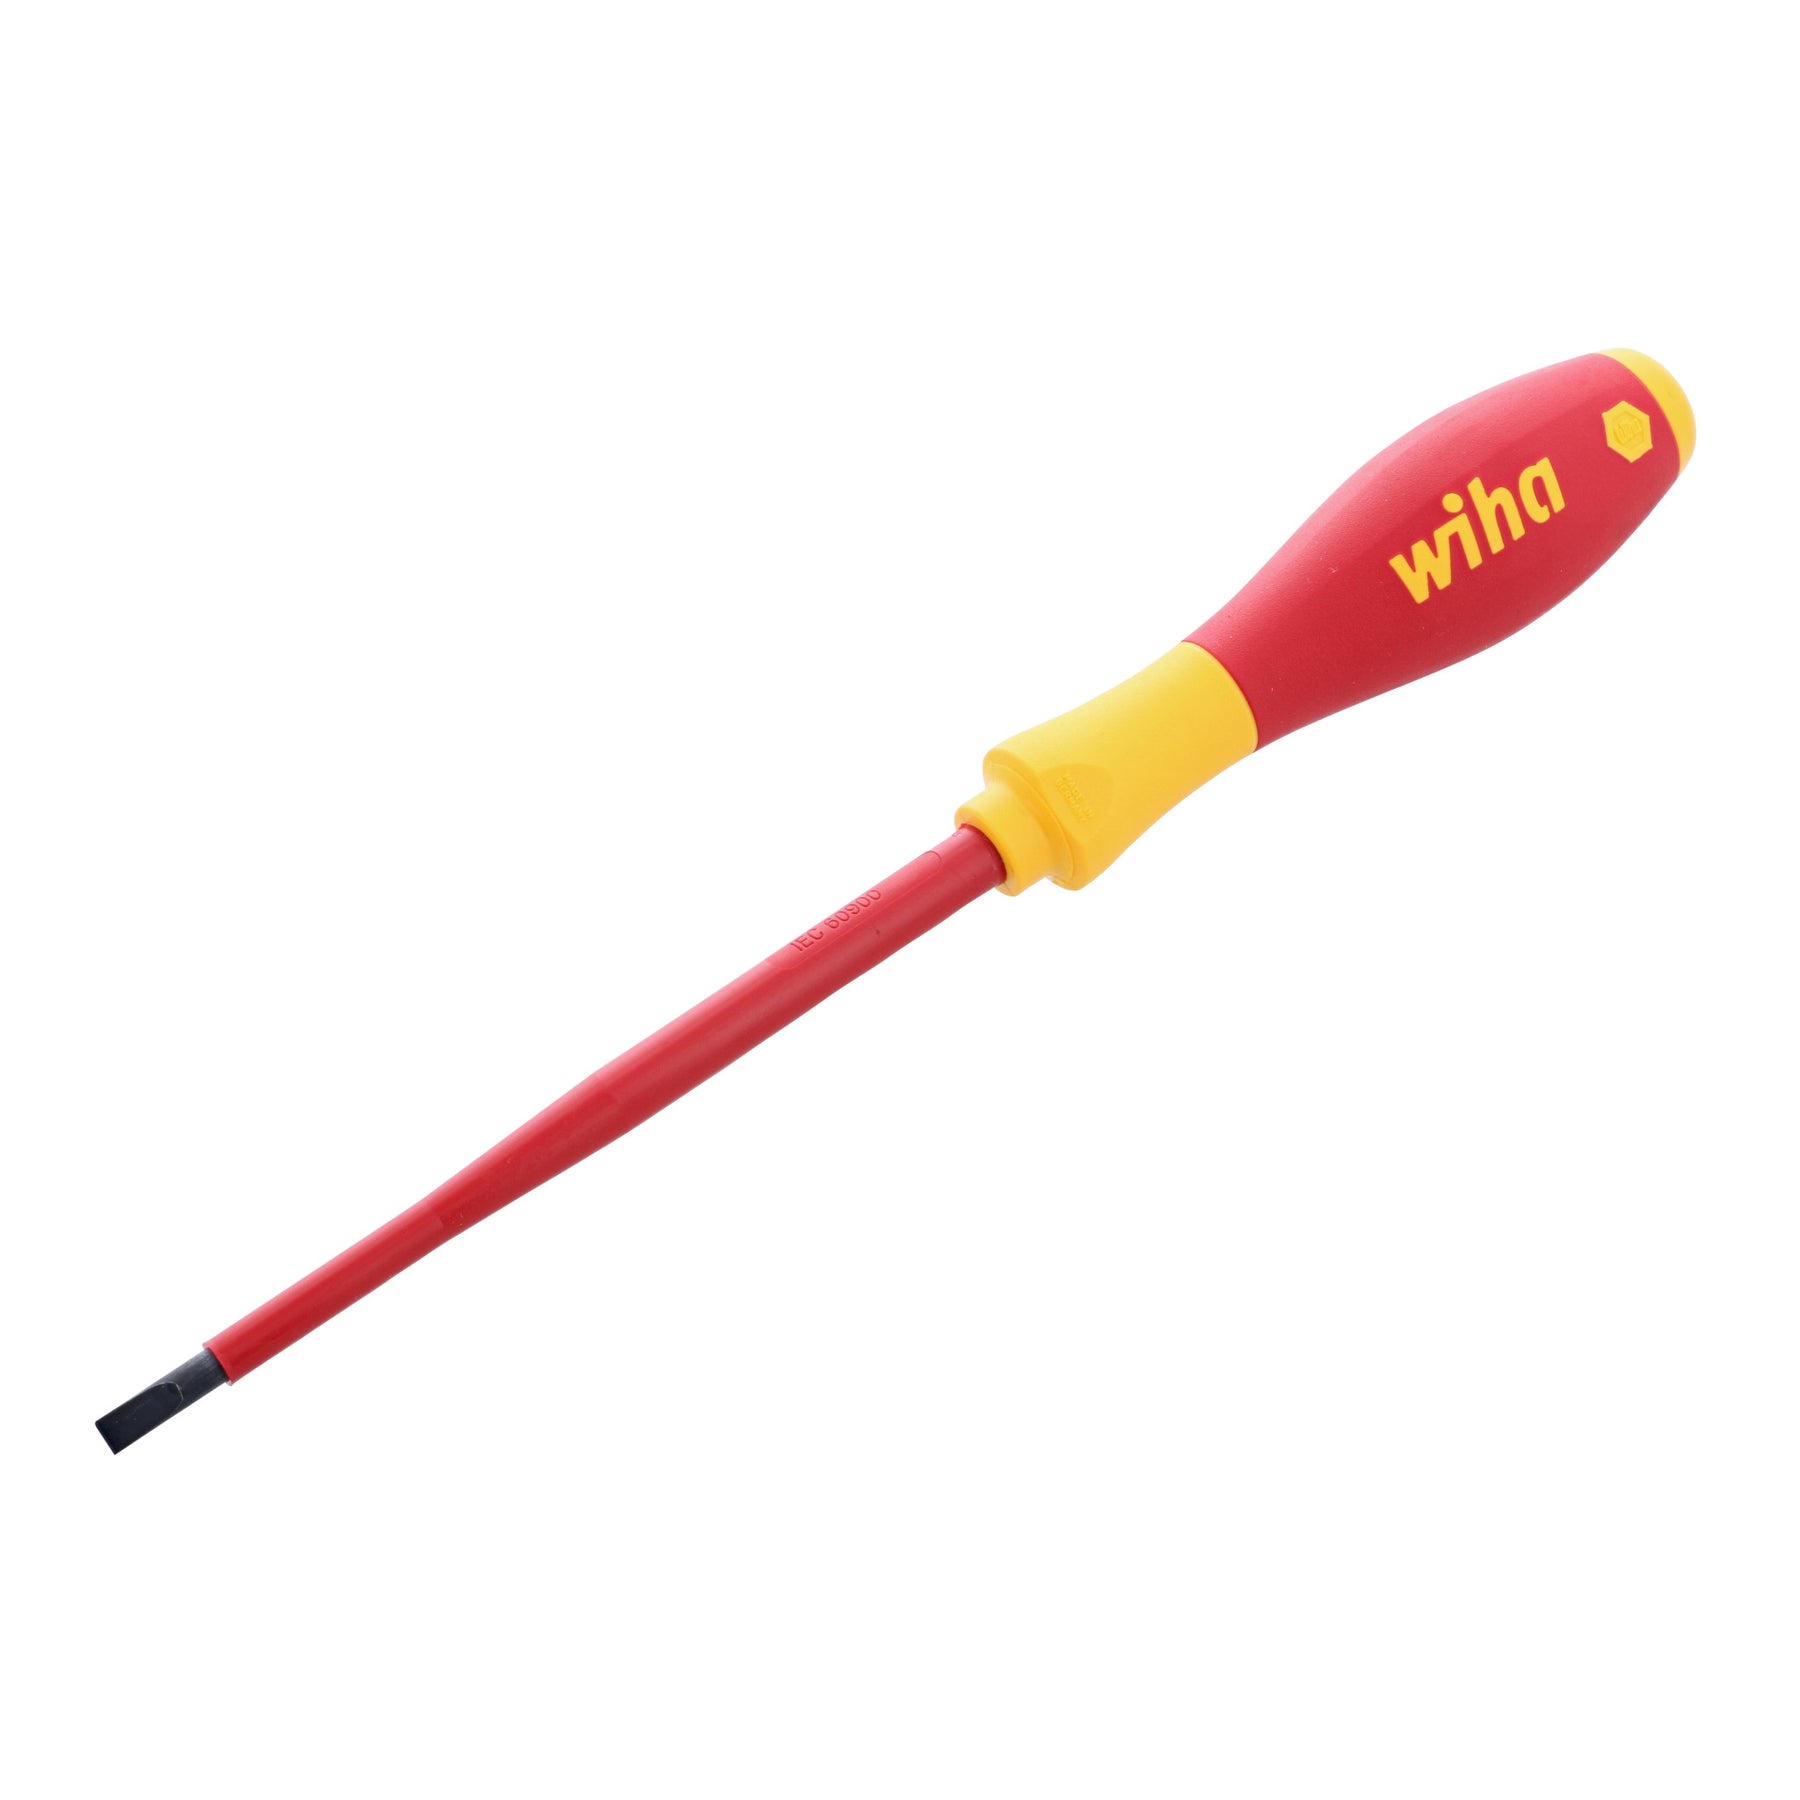 Insulated SoftFinish Slotted Screwdriver 4.5mm x 125mm